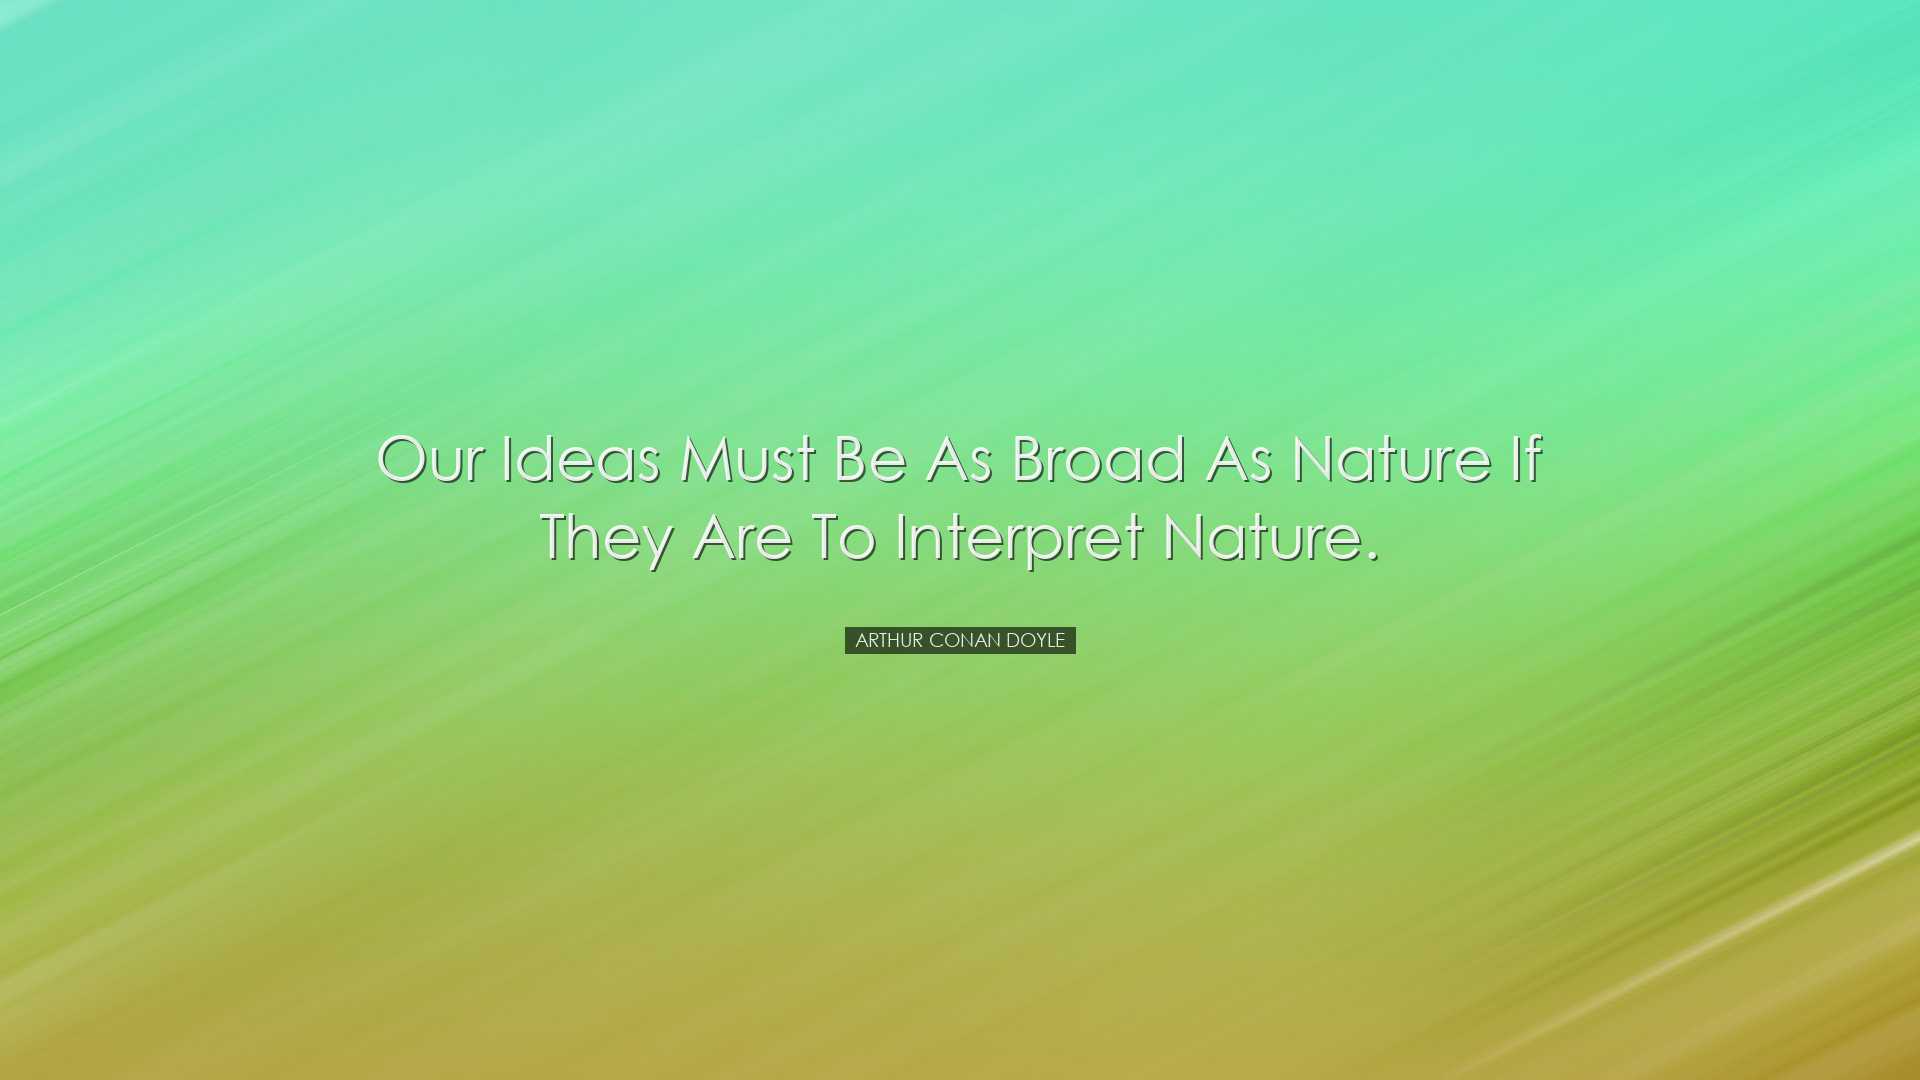 Our ideas must be as broad as Nature if they are to interpret Natu